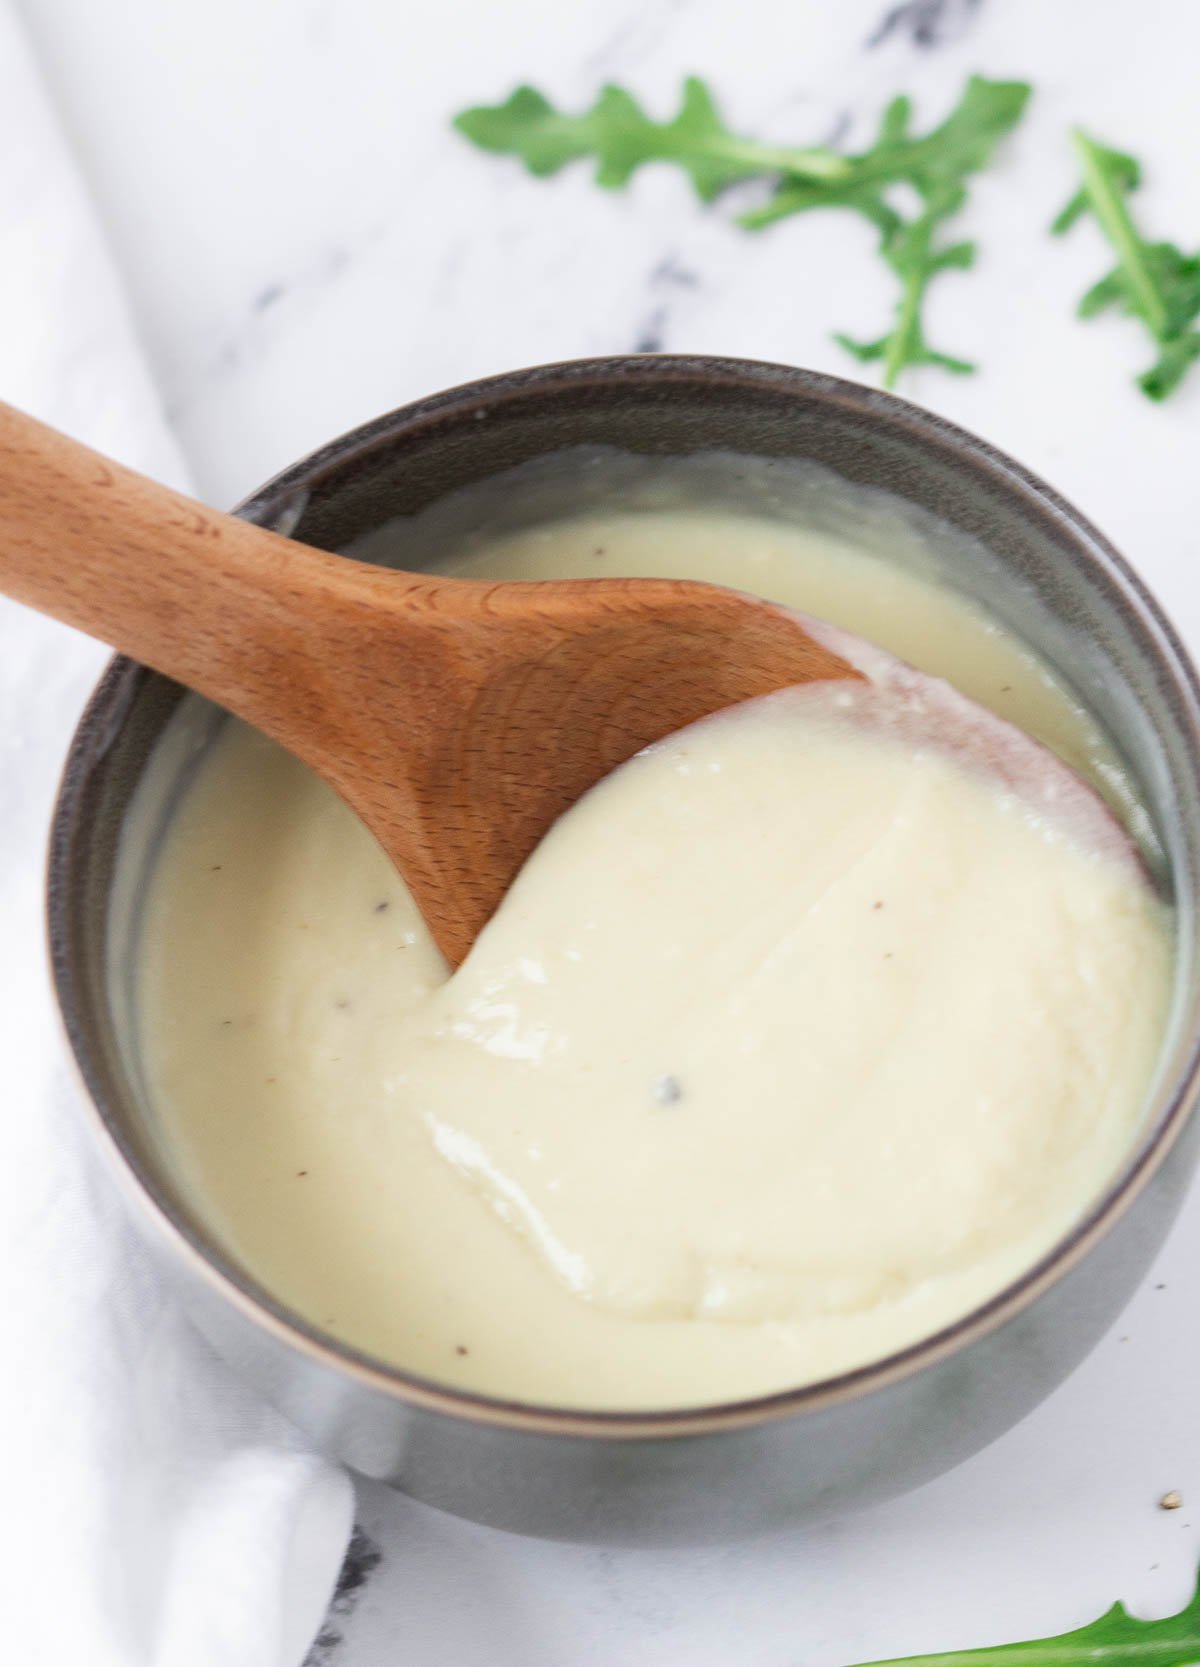 close up of wooden spoon scooping a spoonful of vegan béchamel sauce from gray bowl